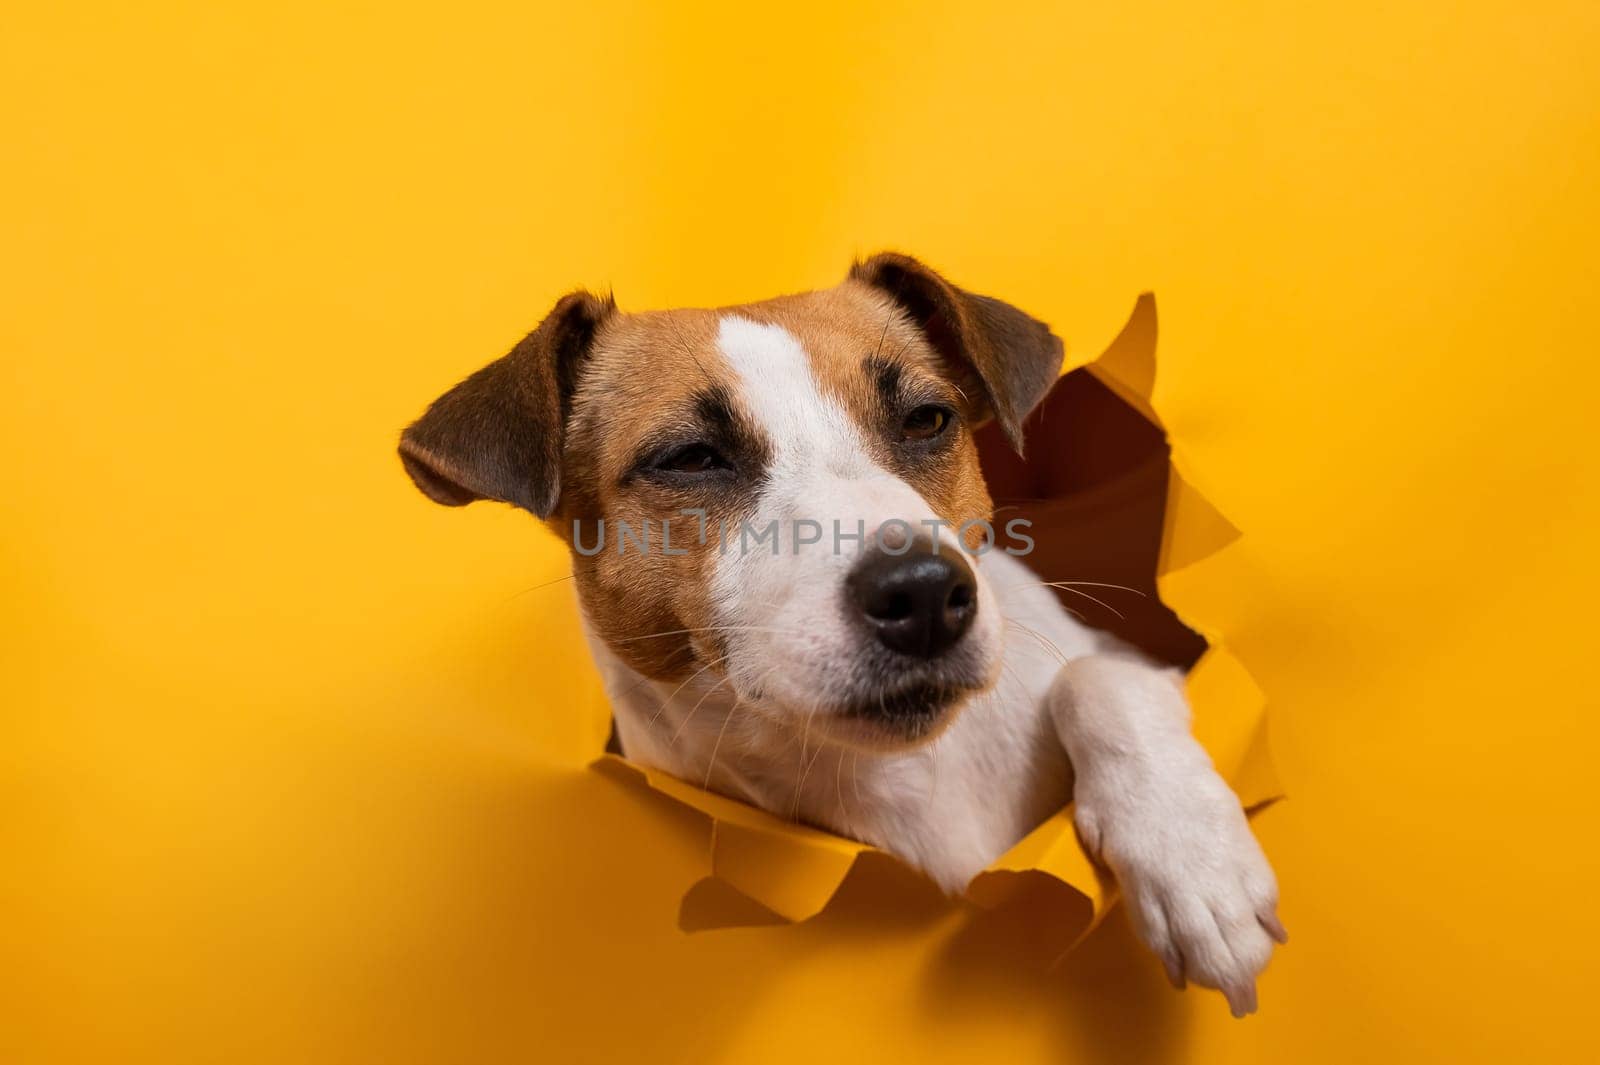 Funny jack russell terrier comes out of a paper orange background tearing it